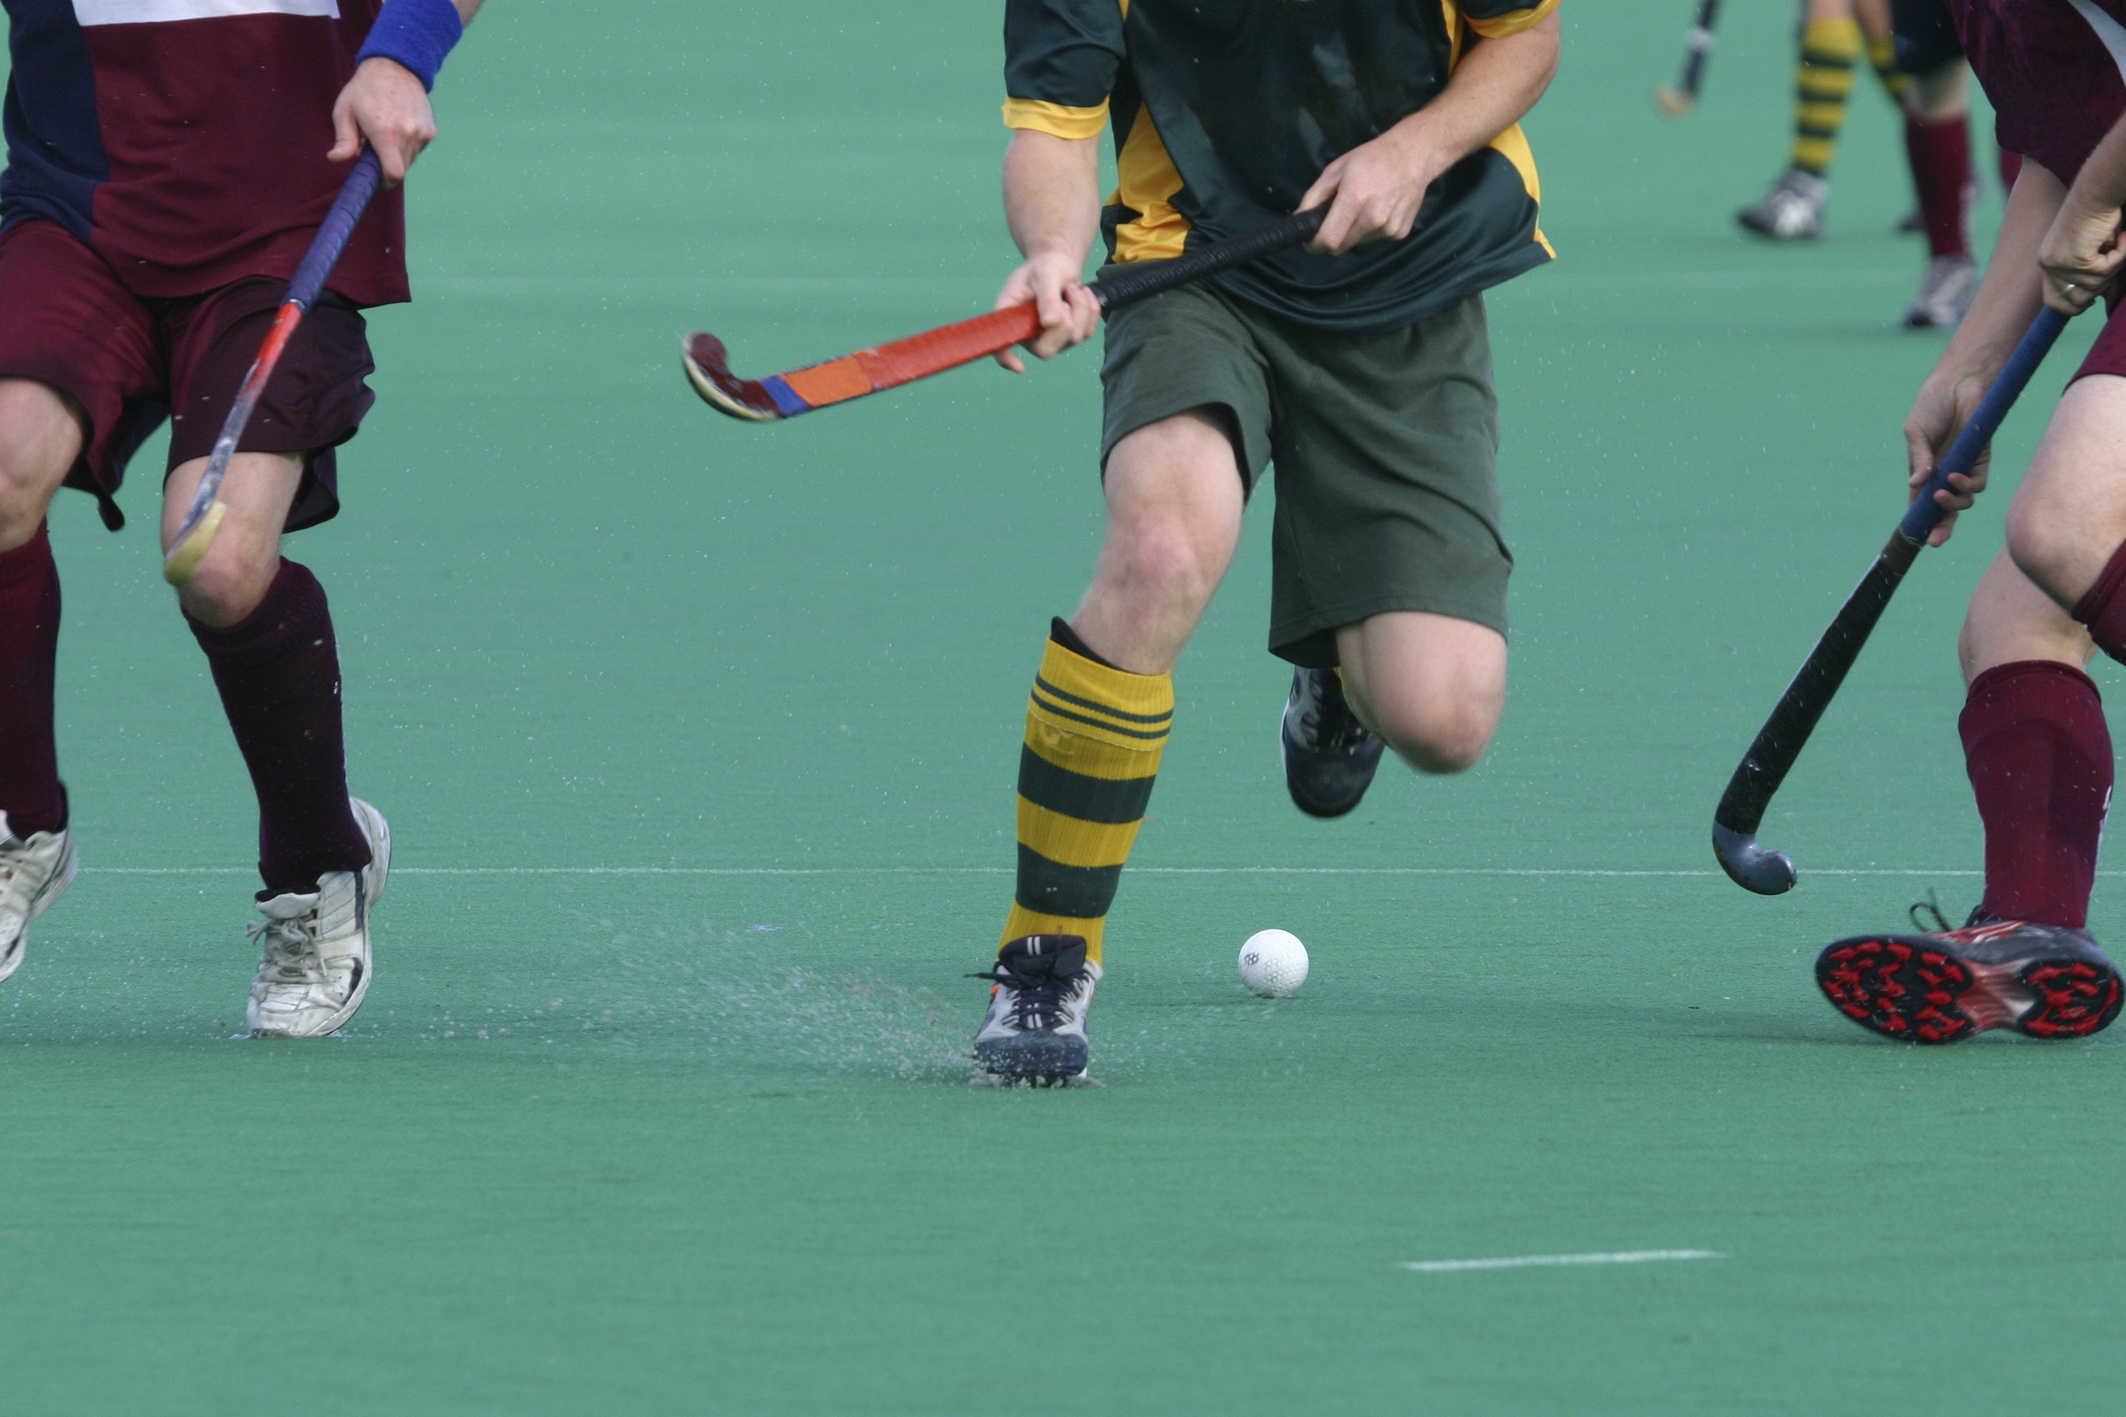 Field Hockey: A team sport that was developed in the 19th century in the United Kingdom. 2130x1420 HD Wallpaper.